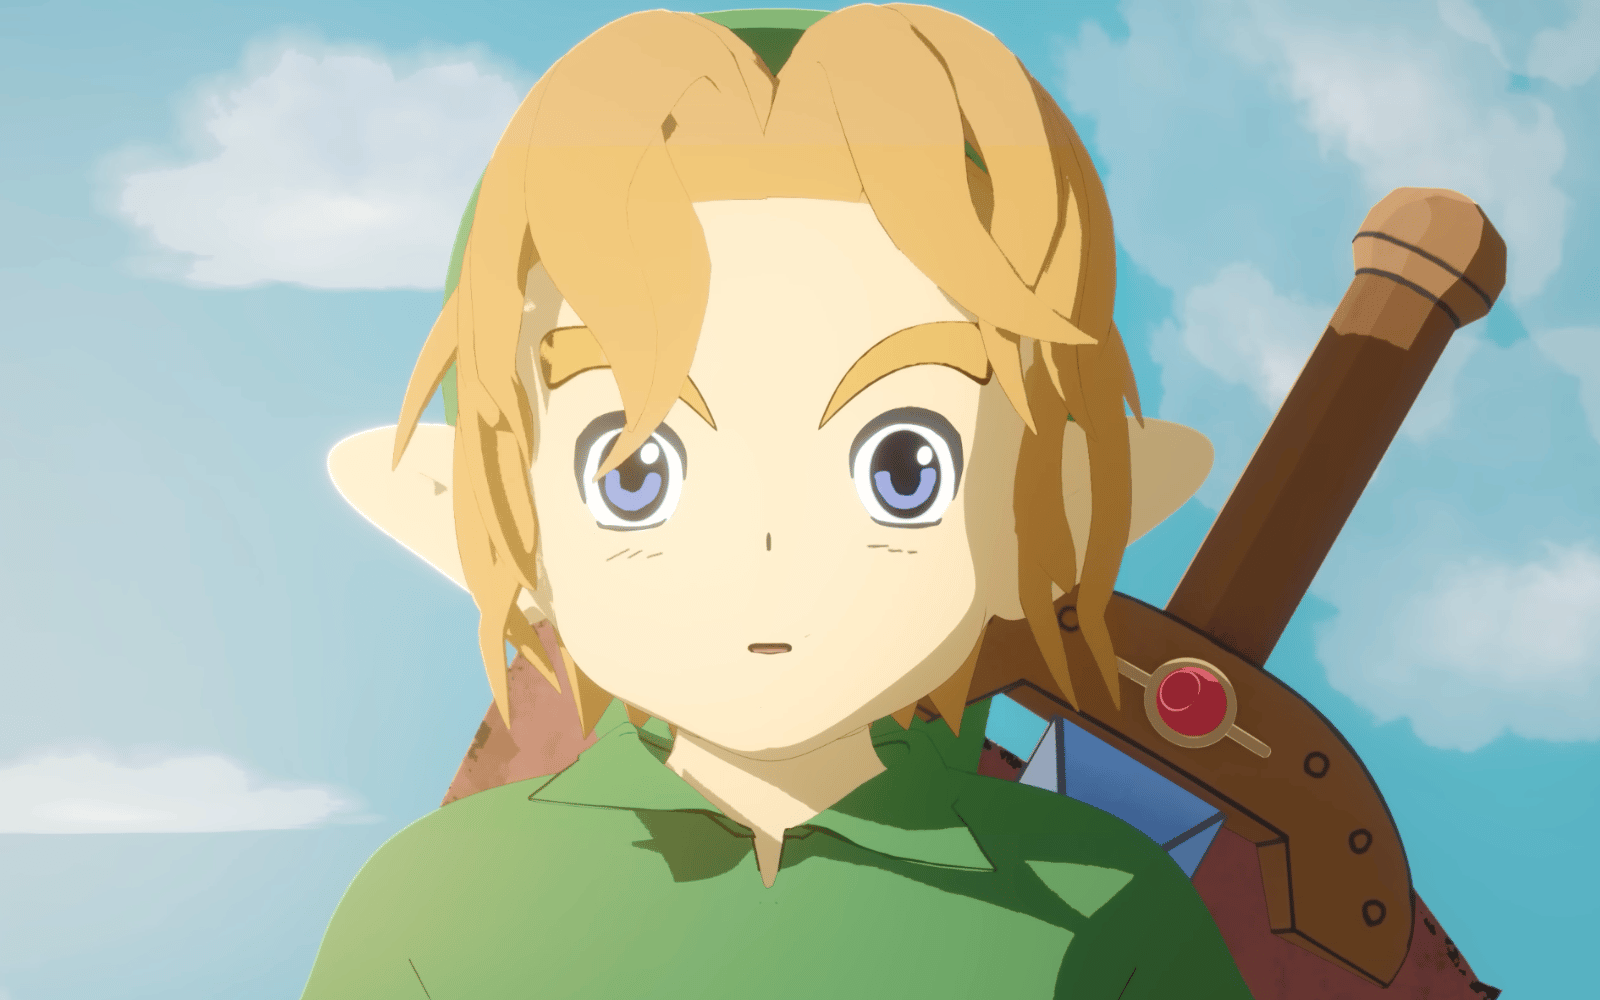 Zelda from The Legend of Zelda: Ocarina of Time, Stable Diffusion